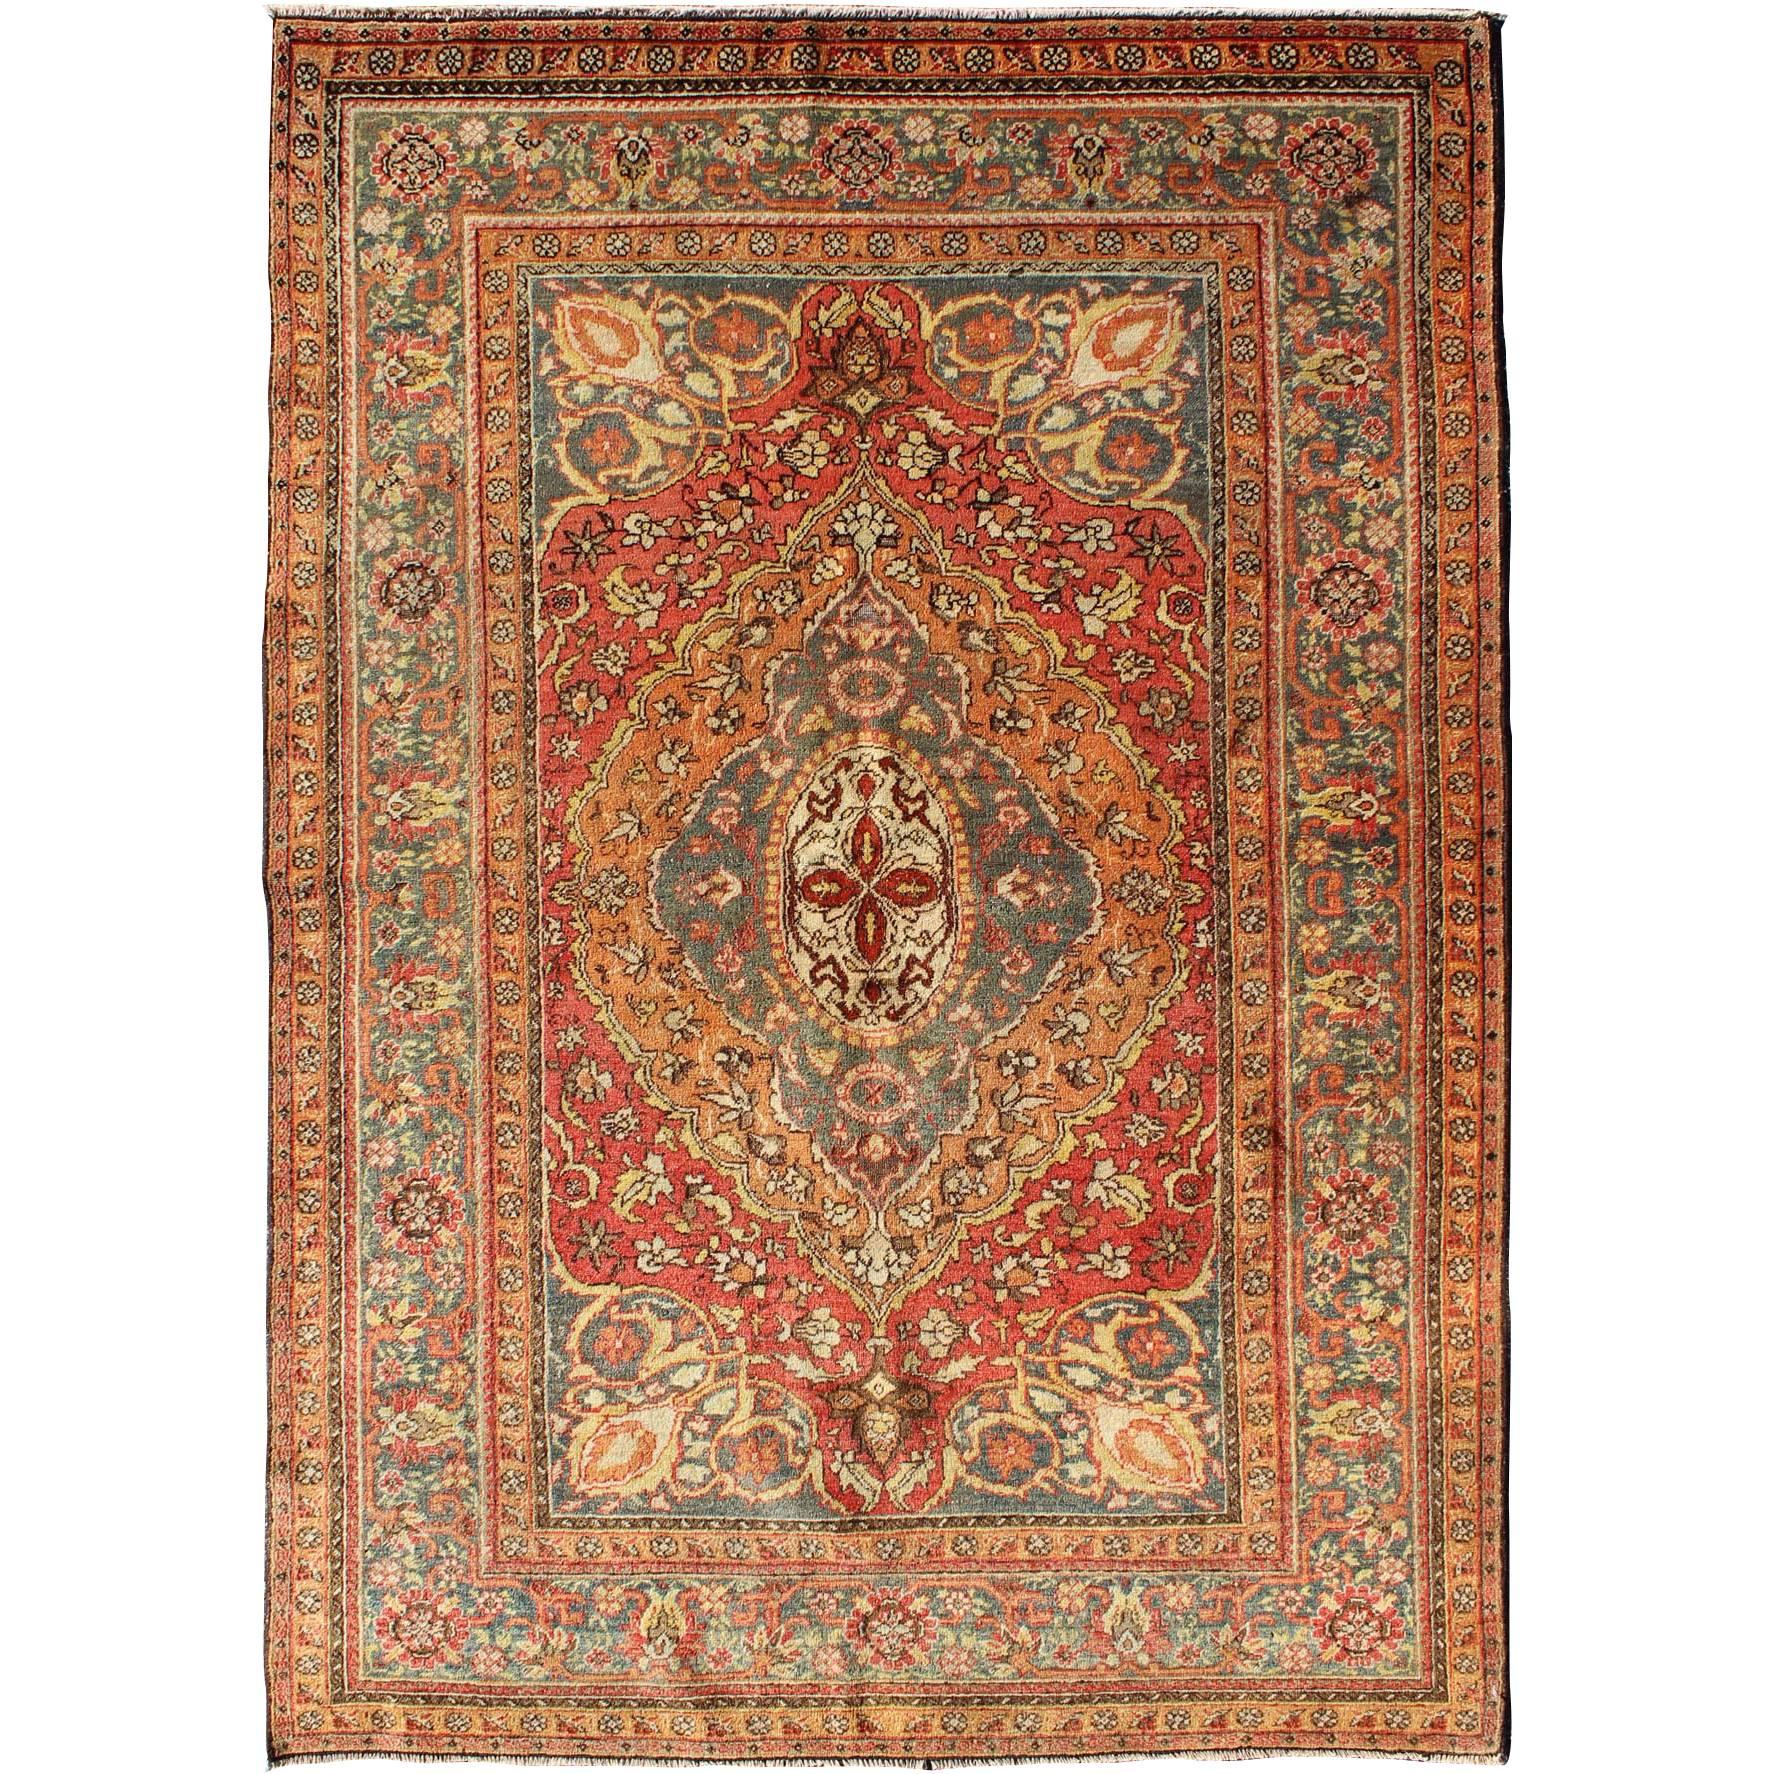 Antique Turkish Sivas Rug with Multi-Layered Medallion in Red, Teal & Orange For Sale